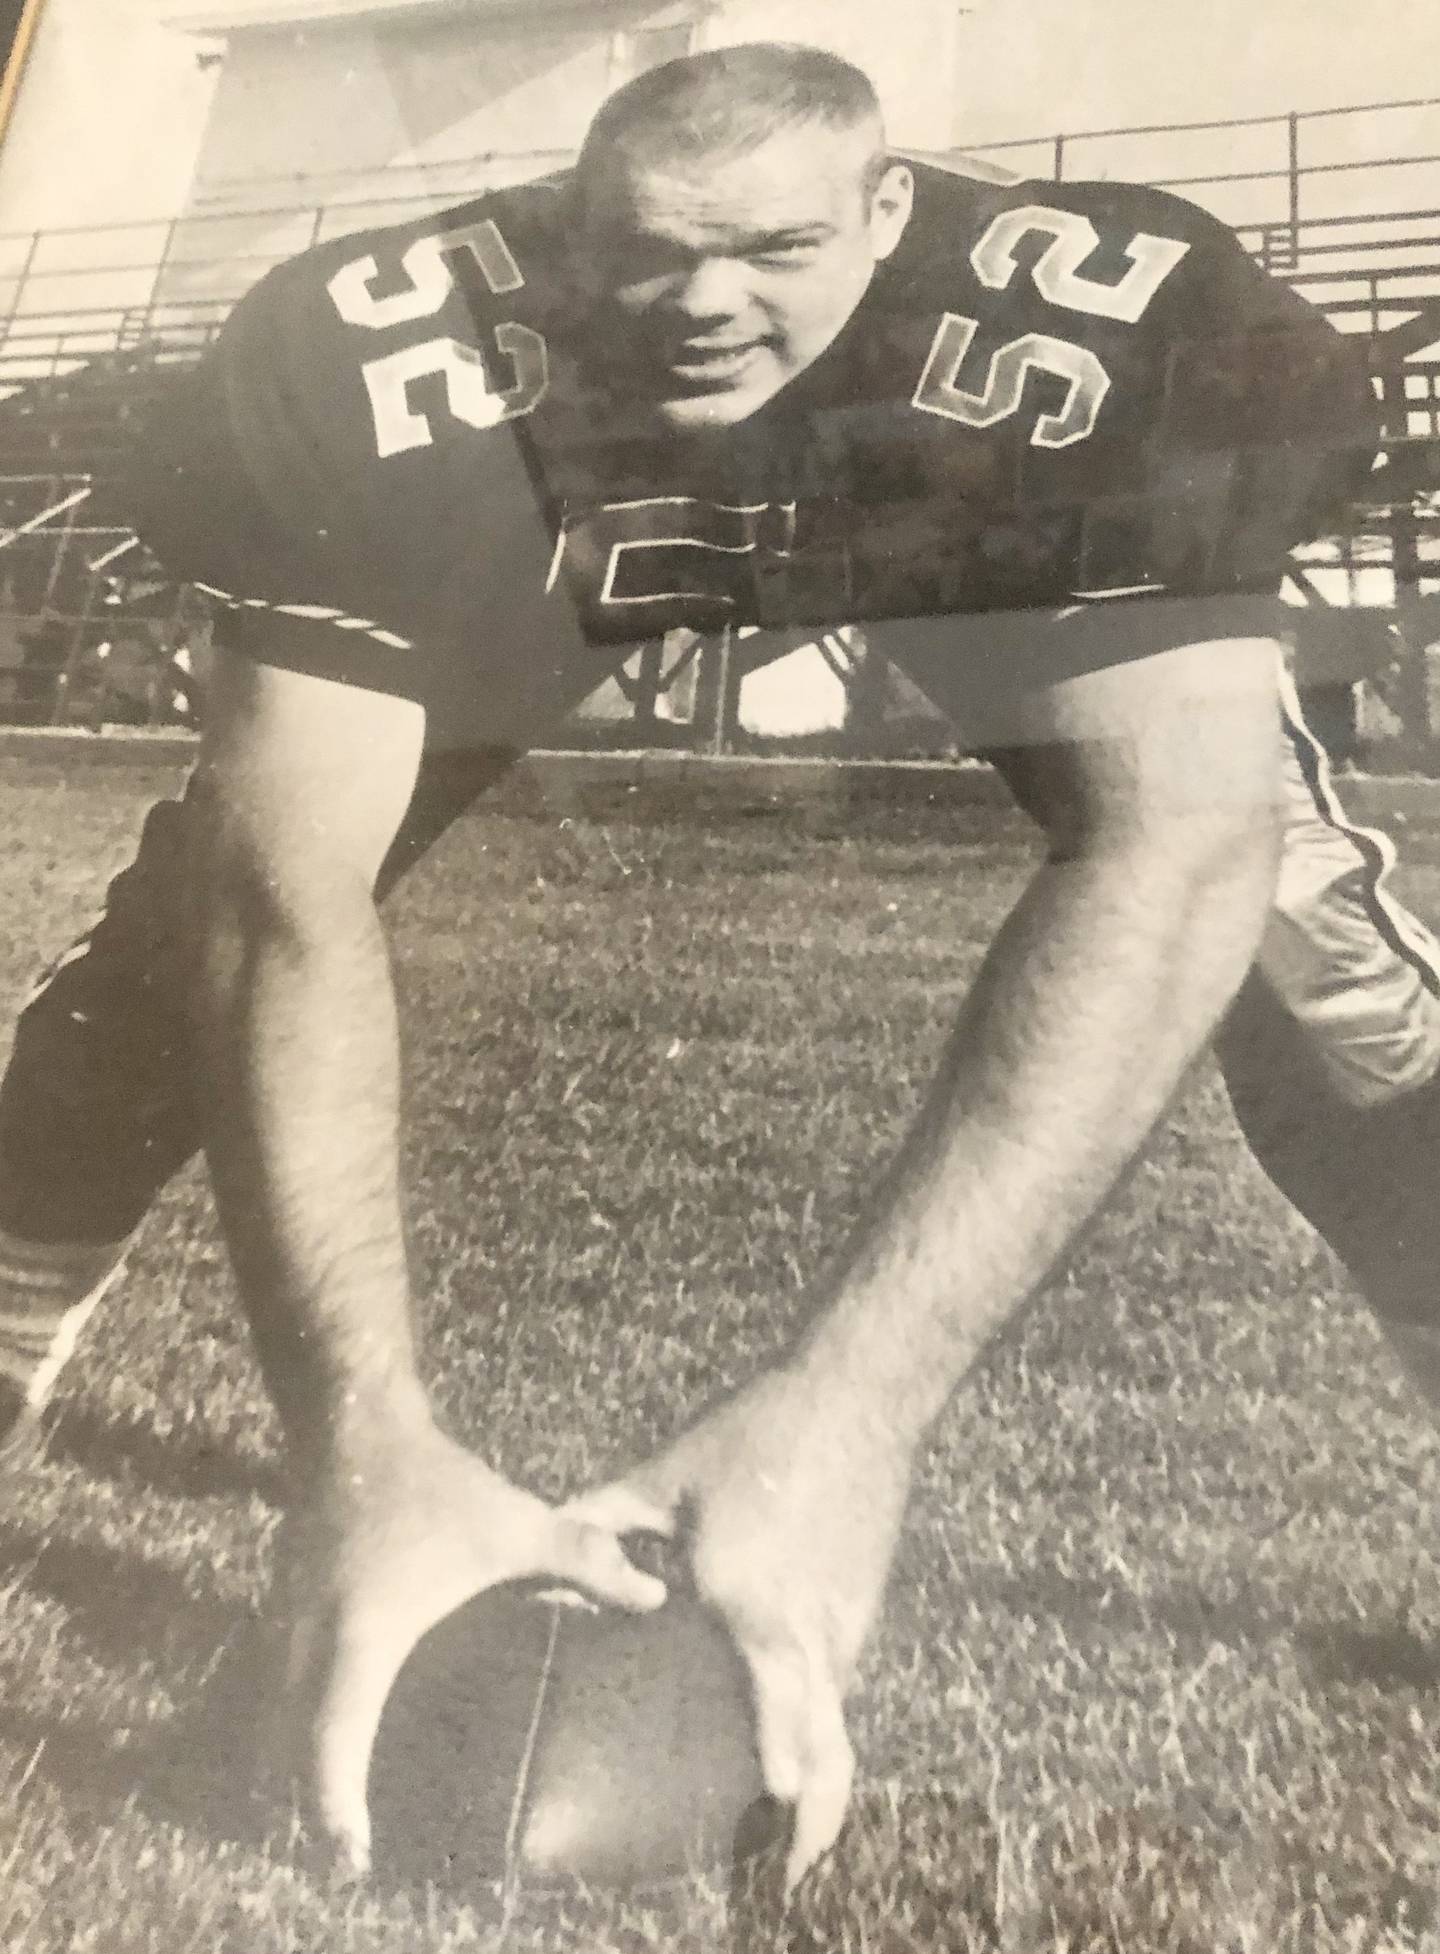 Lee Wahlgren, longtime PHS coach, played football for Bradley University and semipro football as a center for the Chicago Rifles.